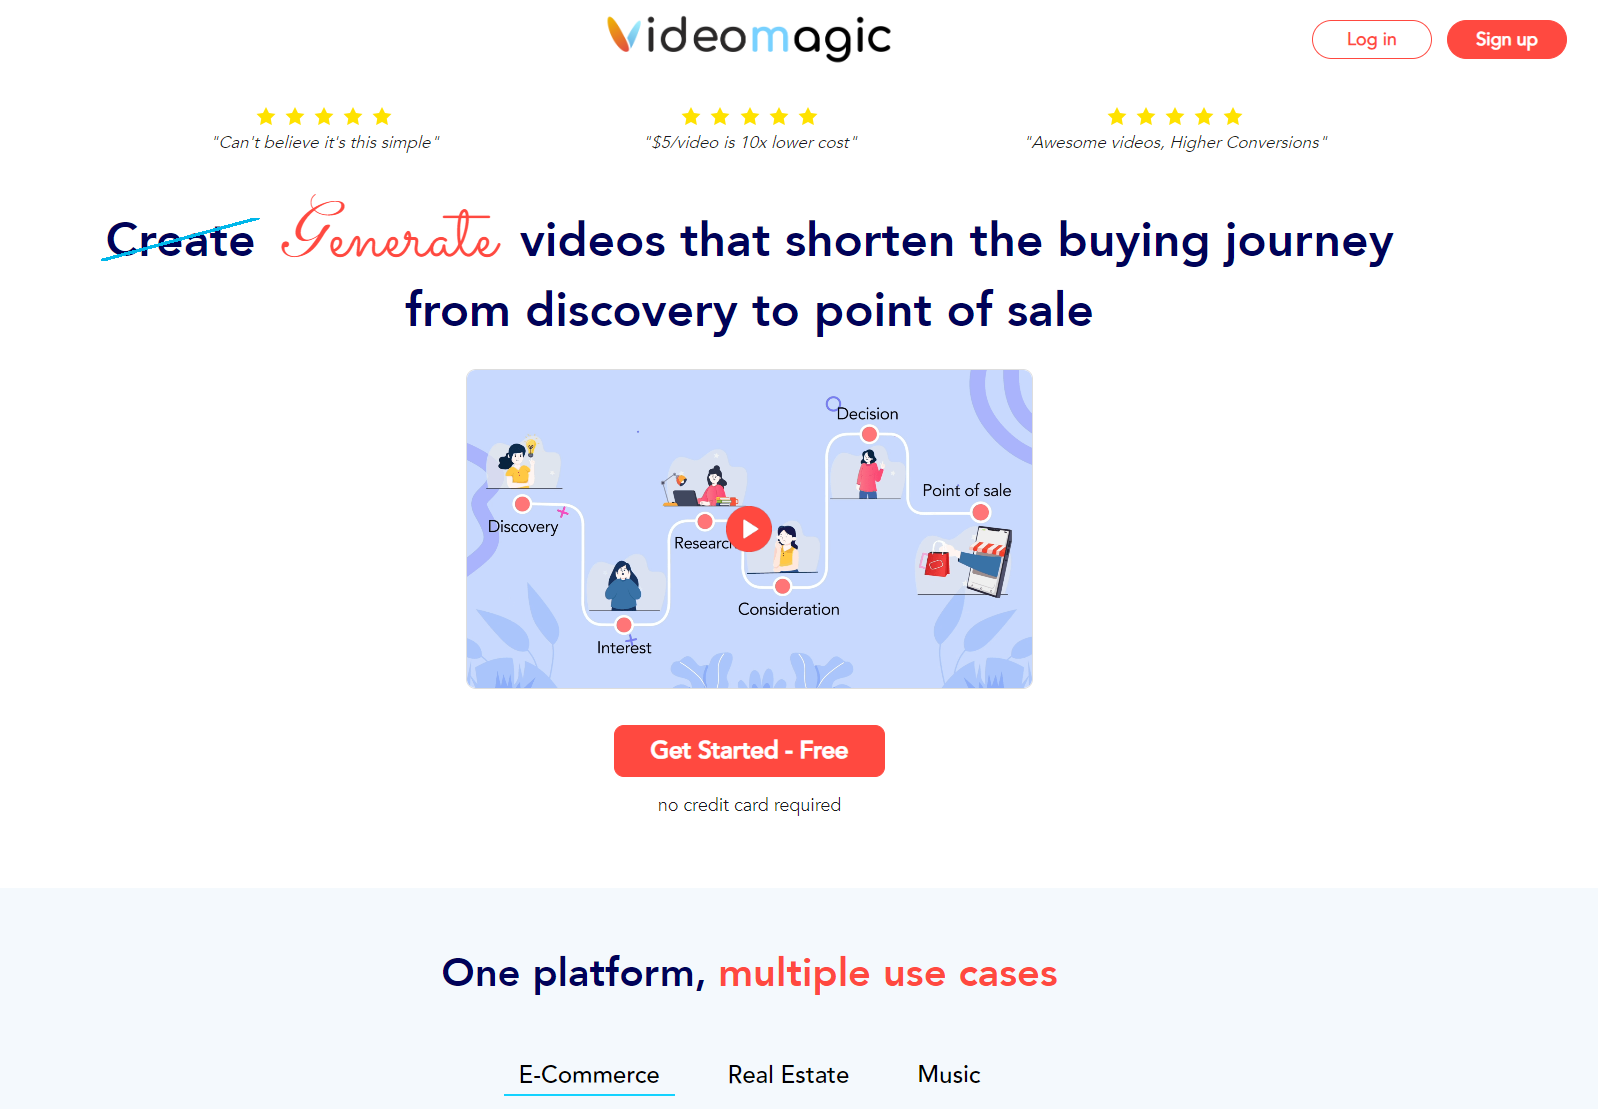 Videomagic generate videos that shorten the buying journey from discovery to point of sale